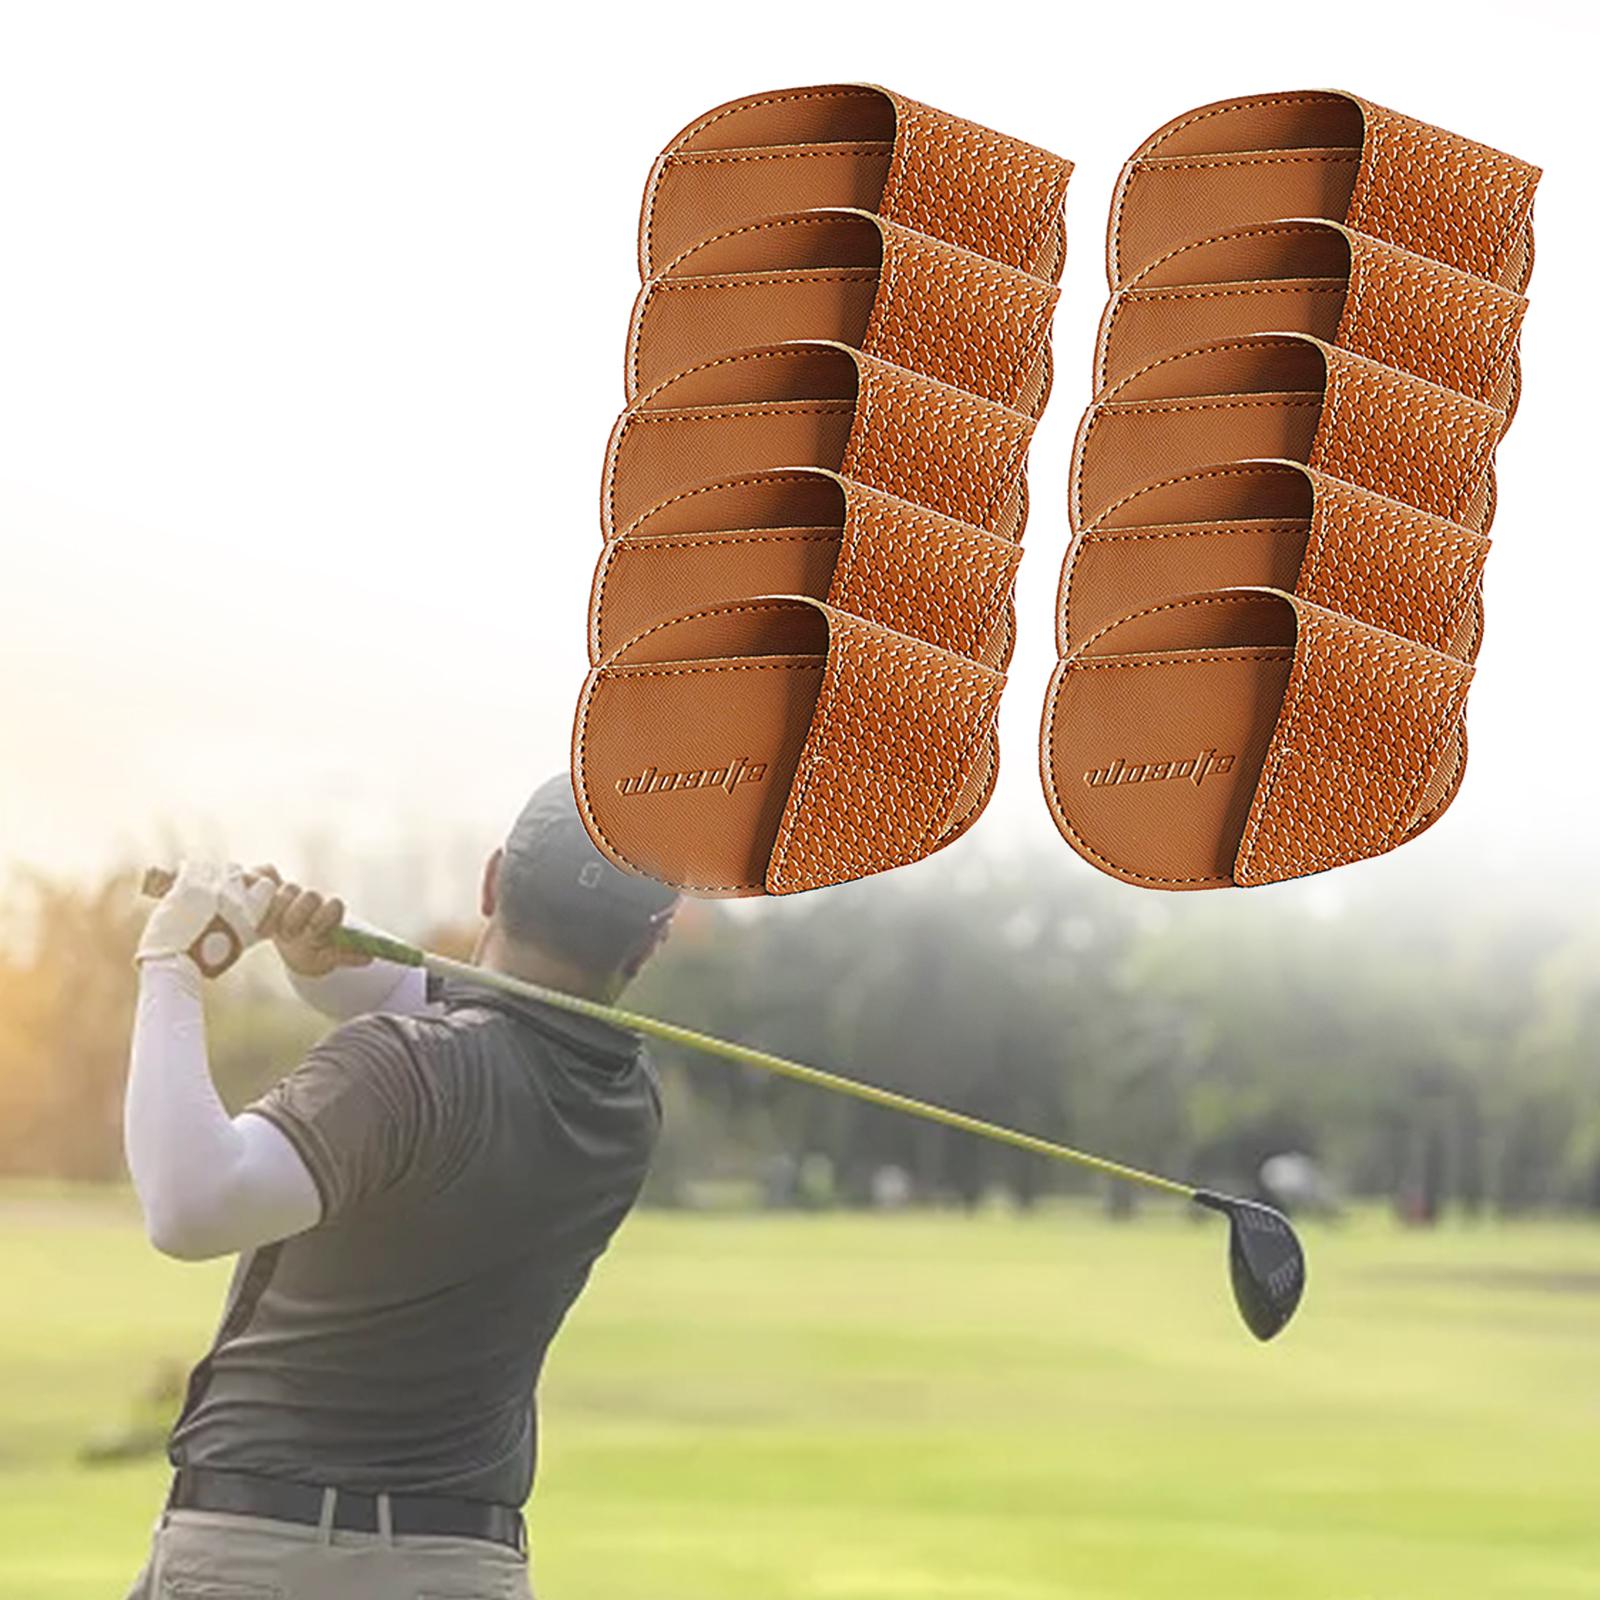 Golf Head Covers PU Portable Protector for Athlete Travel Golf Training Brown Small